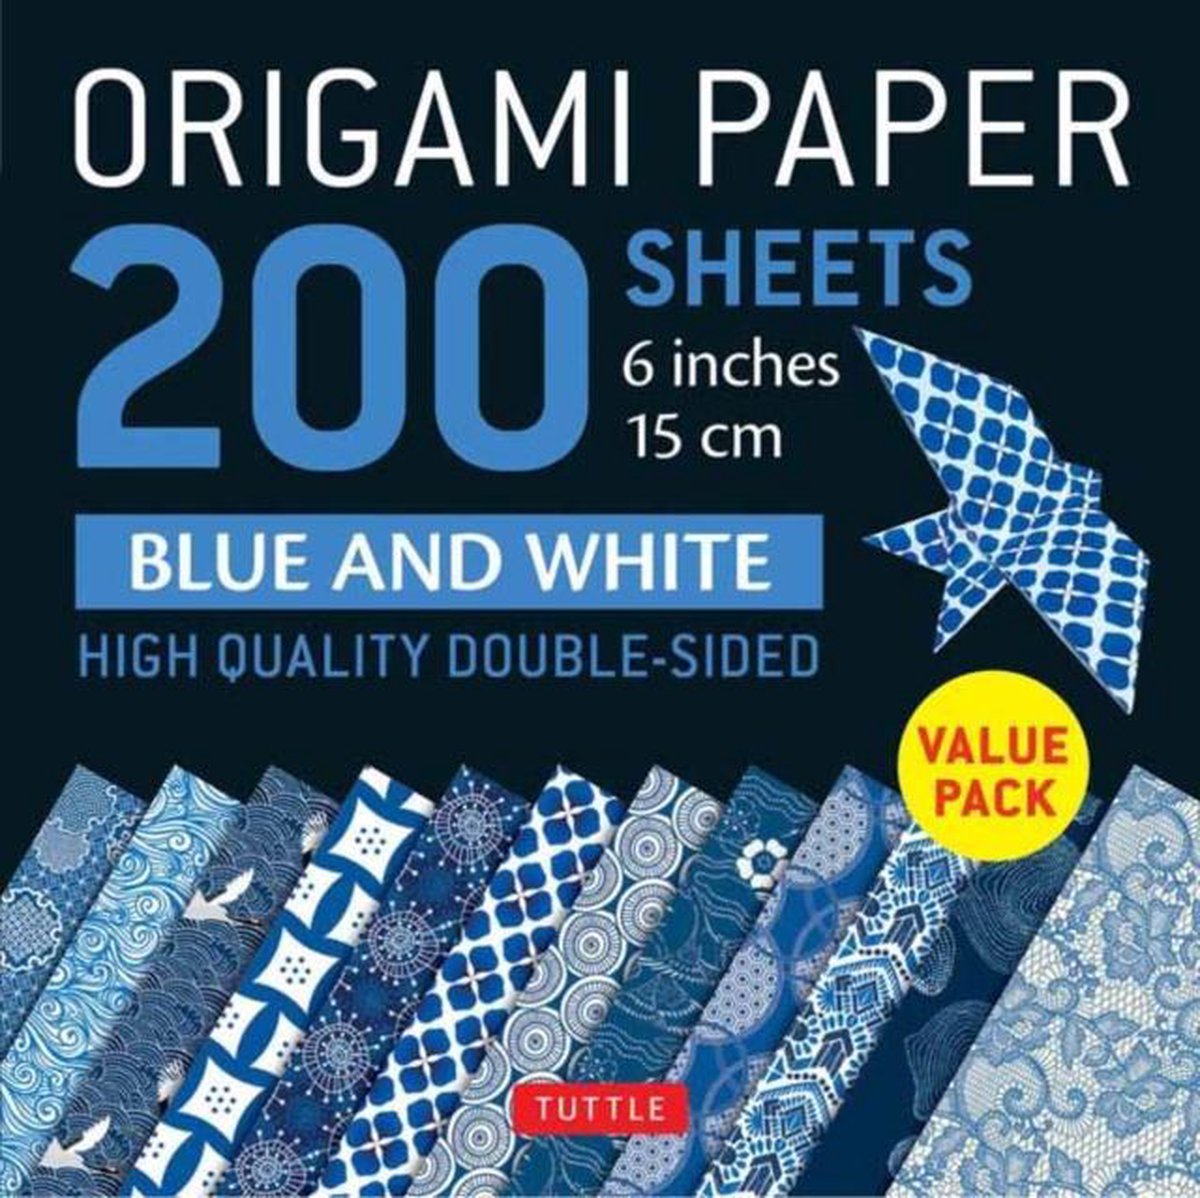 Origami Paper 200 sheets Blue and White Patterns 6 (15 cm)